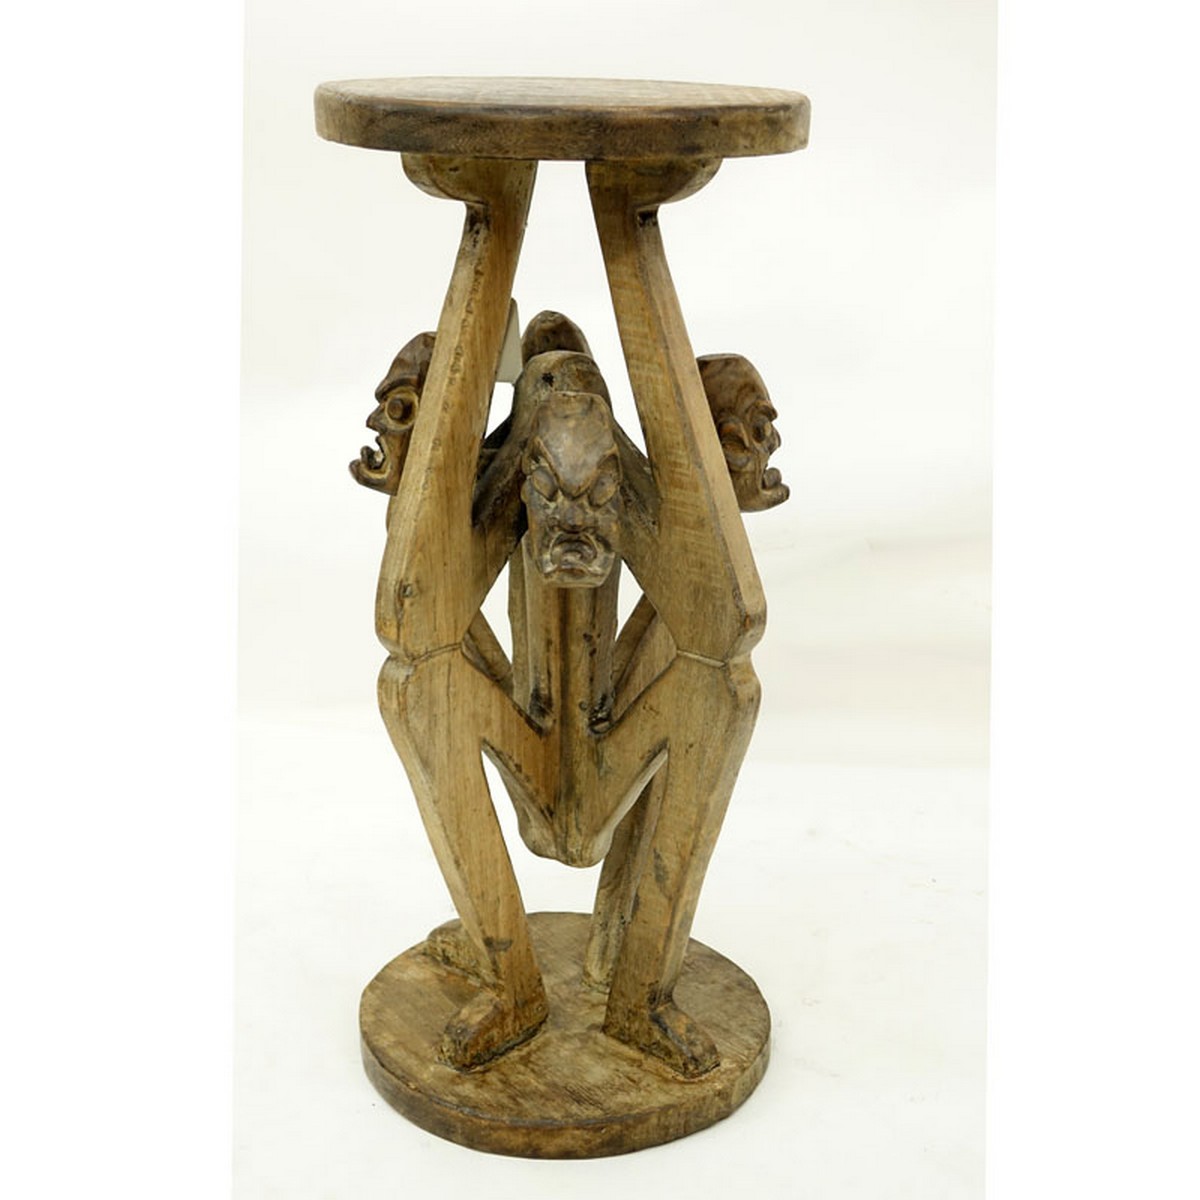 20th Century African Wood Carved Figural Stool, Attributed to the Republic of Congo. Typical condition associated with aging of natural wood otherwise good condition.